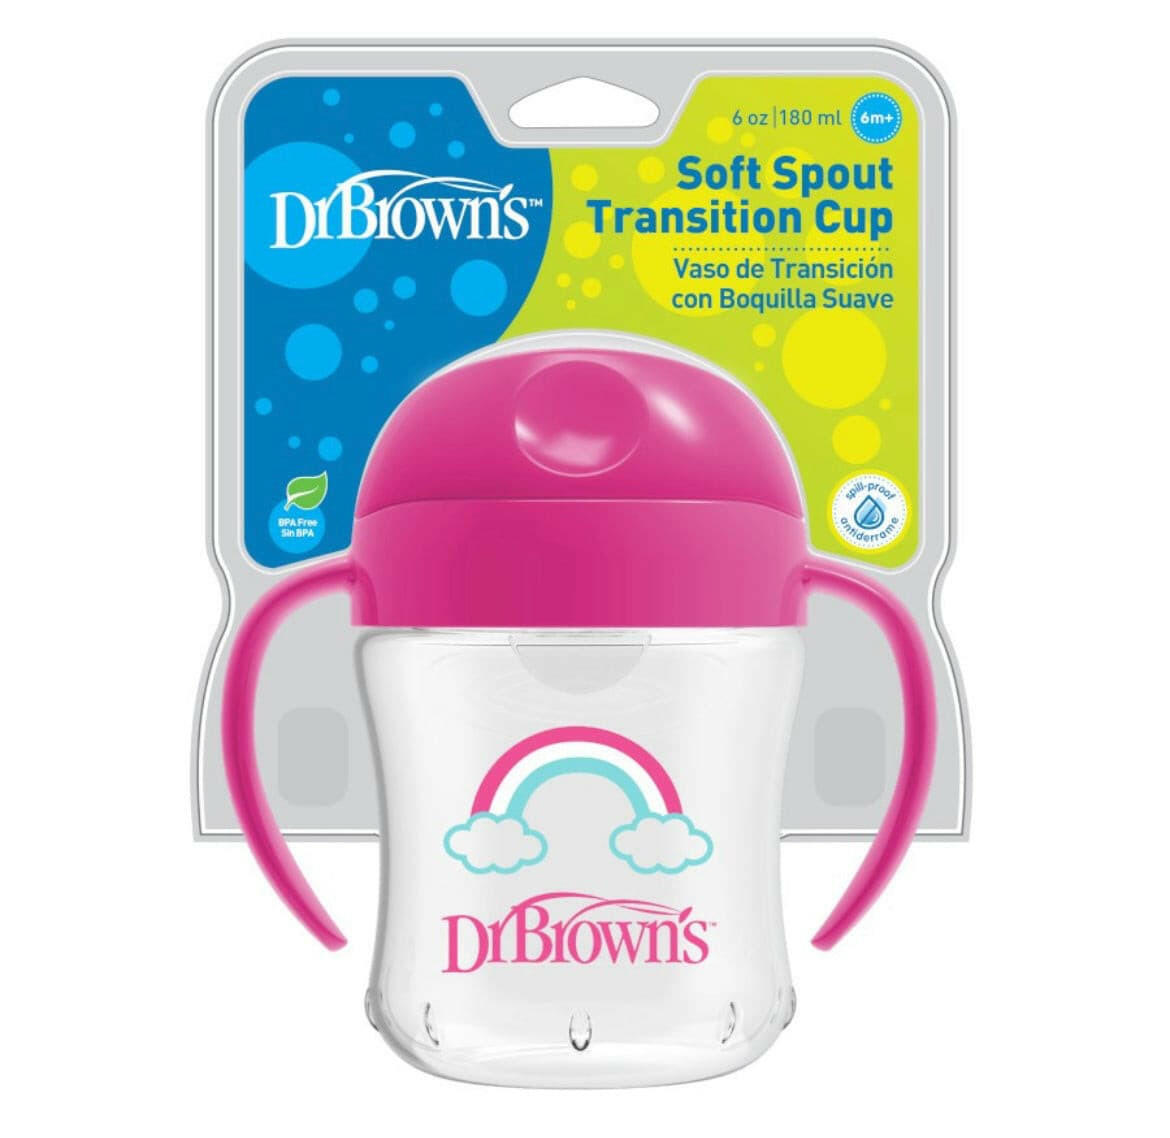 Soft-Spout Transition Cup by Dr. Brown,180 ml, 6m+.